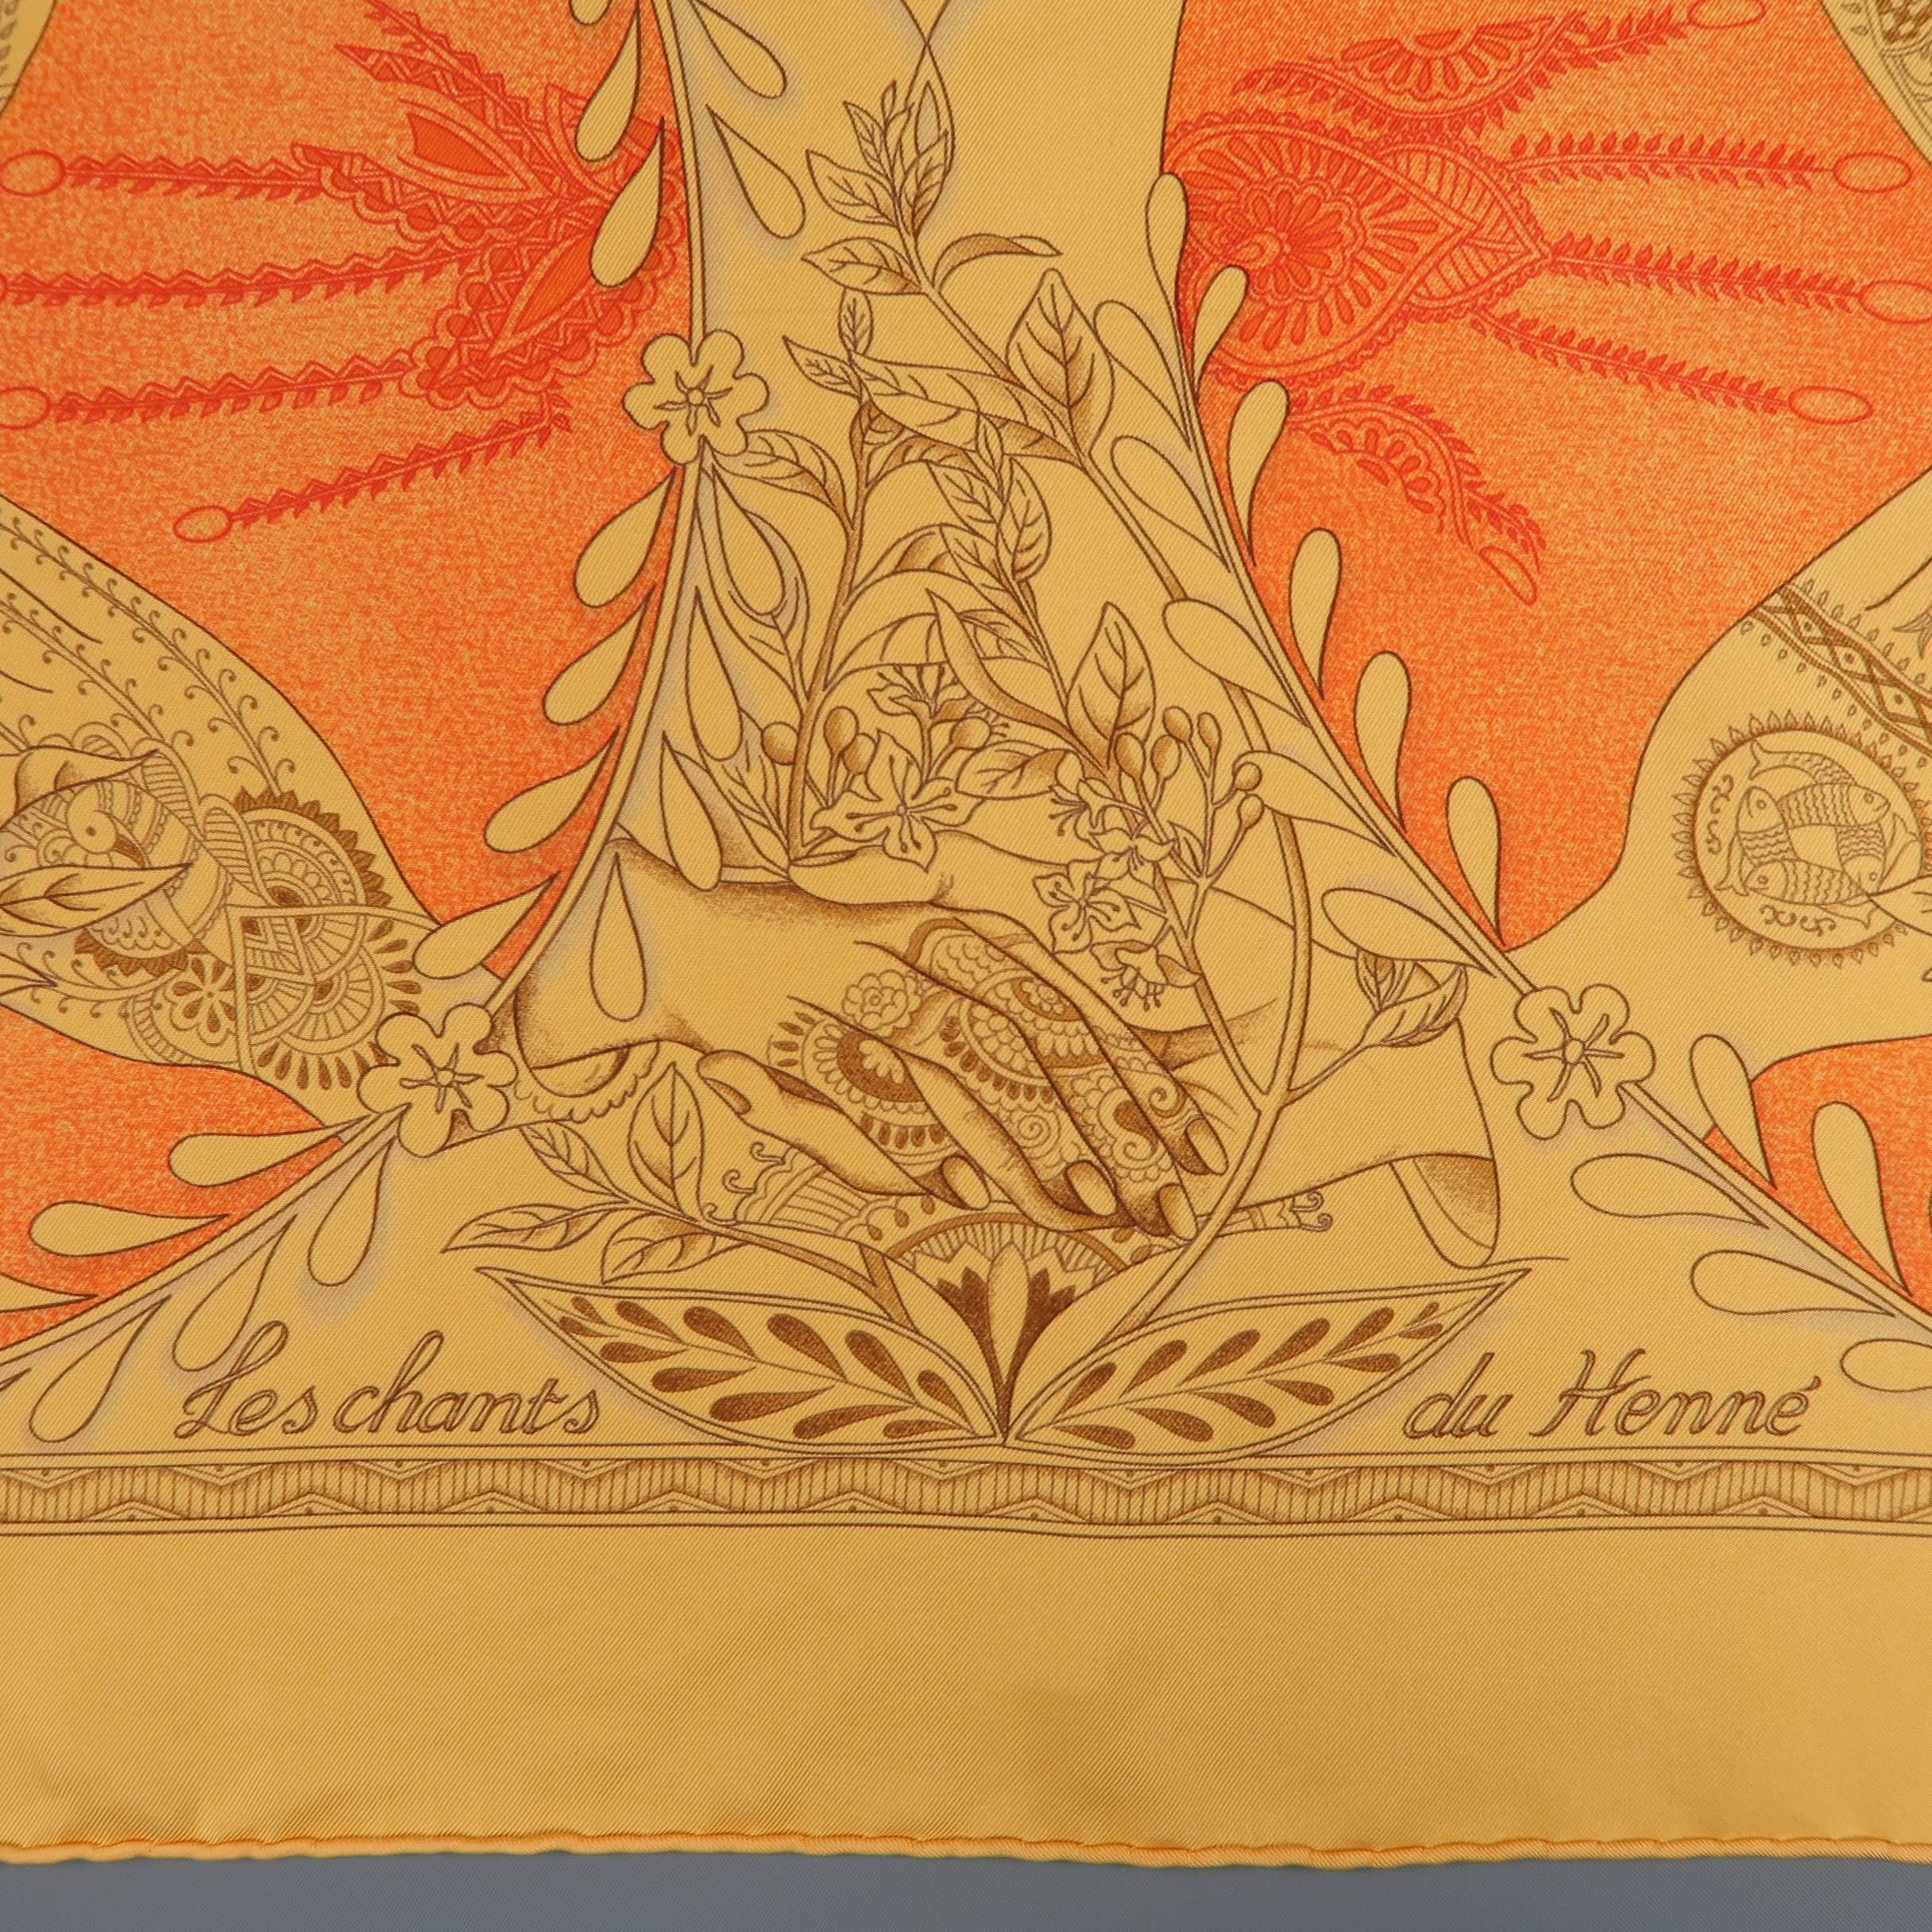 HERMES "Les Chants du Henne" scarf comes in a light orange silk twill with beautiful henna tattoo artist motif. Tag removed. As-is. Made in France.
 
Good Pre-Owned Condition.
 
35 x 35 in.

SKU: 85531